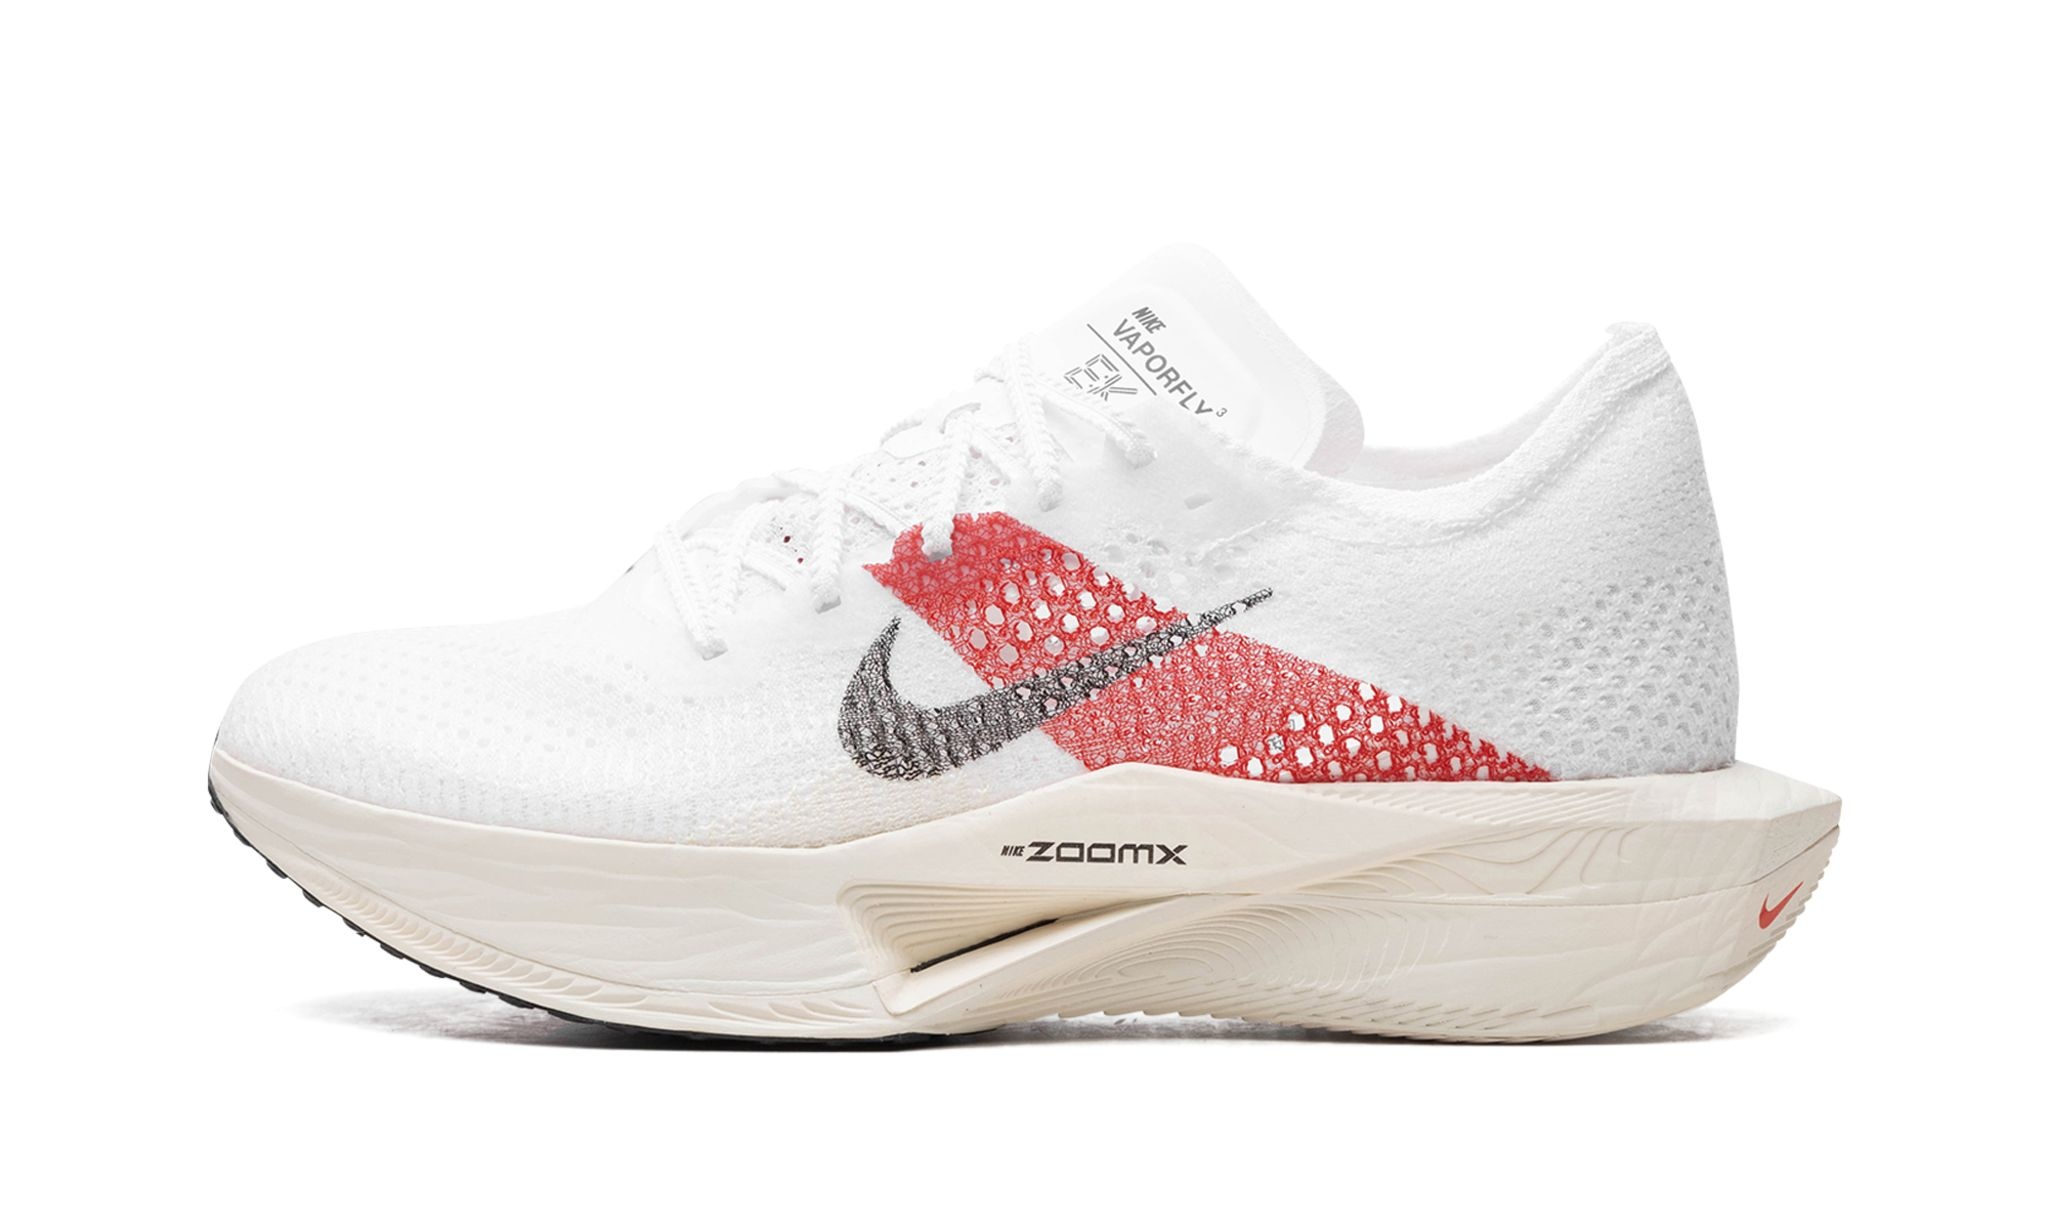 Zoomx Vaporfly Next% 3 EK "Chile Red" - 1